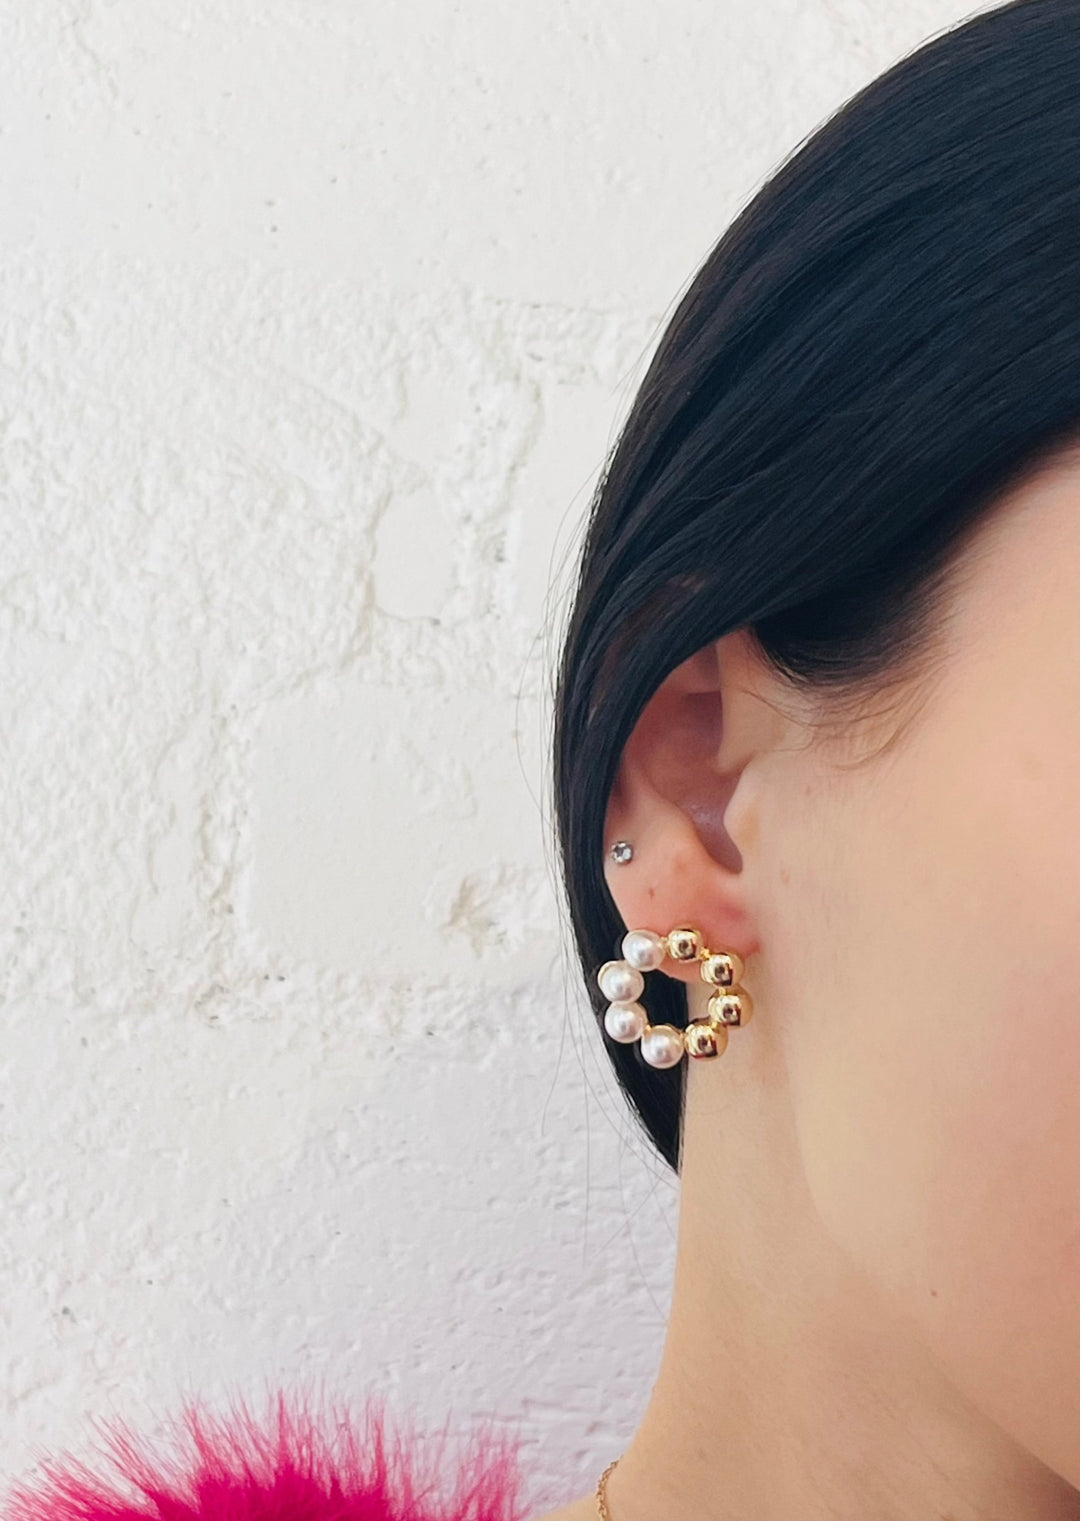 Gold and Pearl Circle Stud Earring, Jewelry, Adeline, Adeline, dallas boutique, dallas texas, texas boutique, women's boutique dallas, adeline boutique, dallas boutique, trendy boutique, affordable boutique